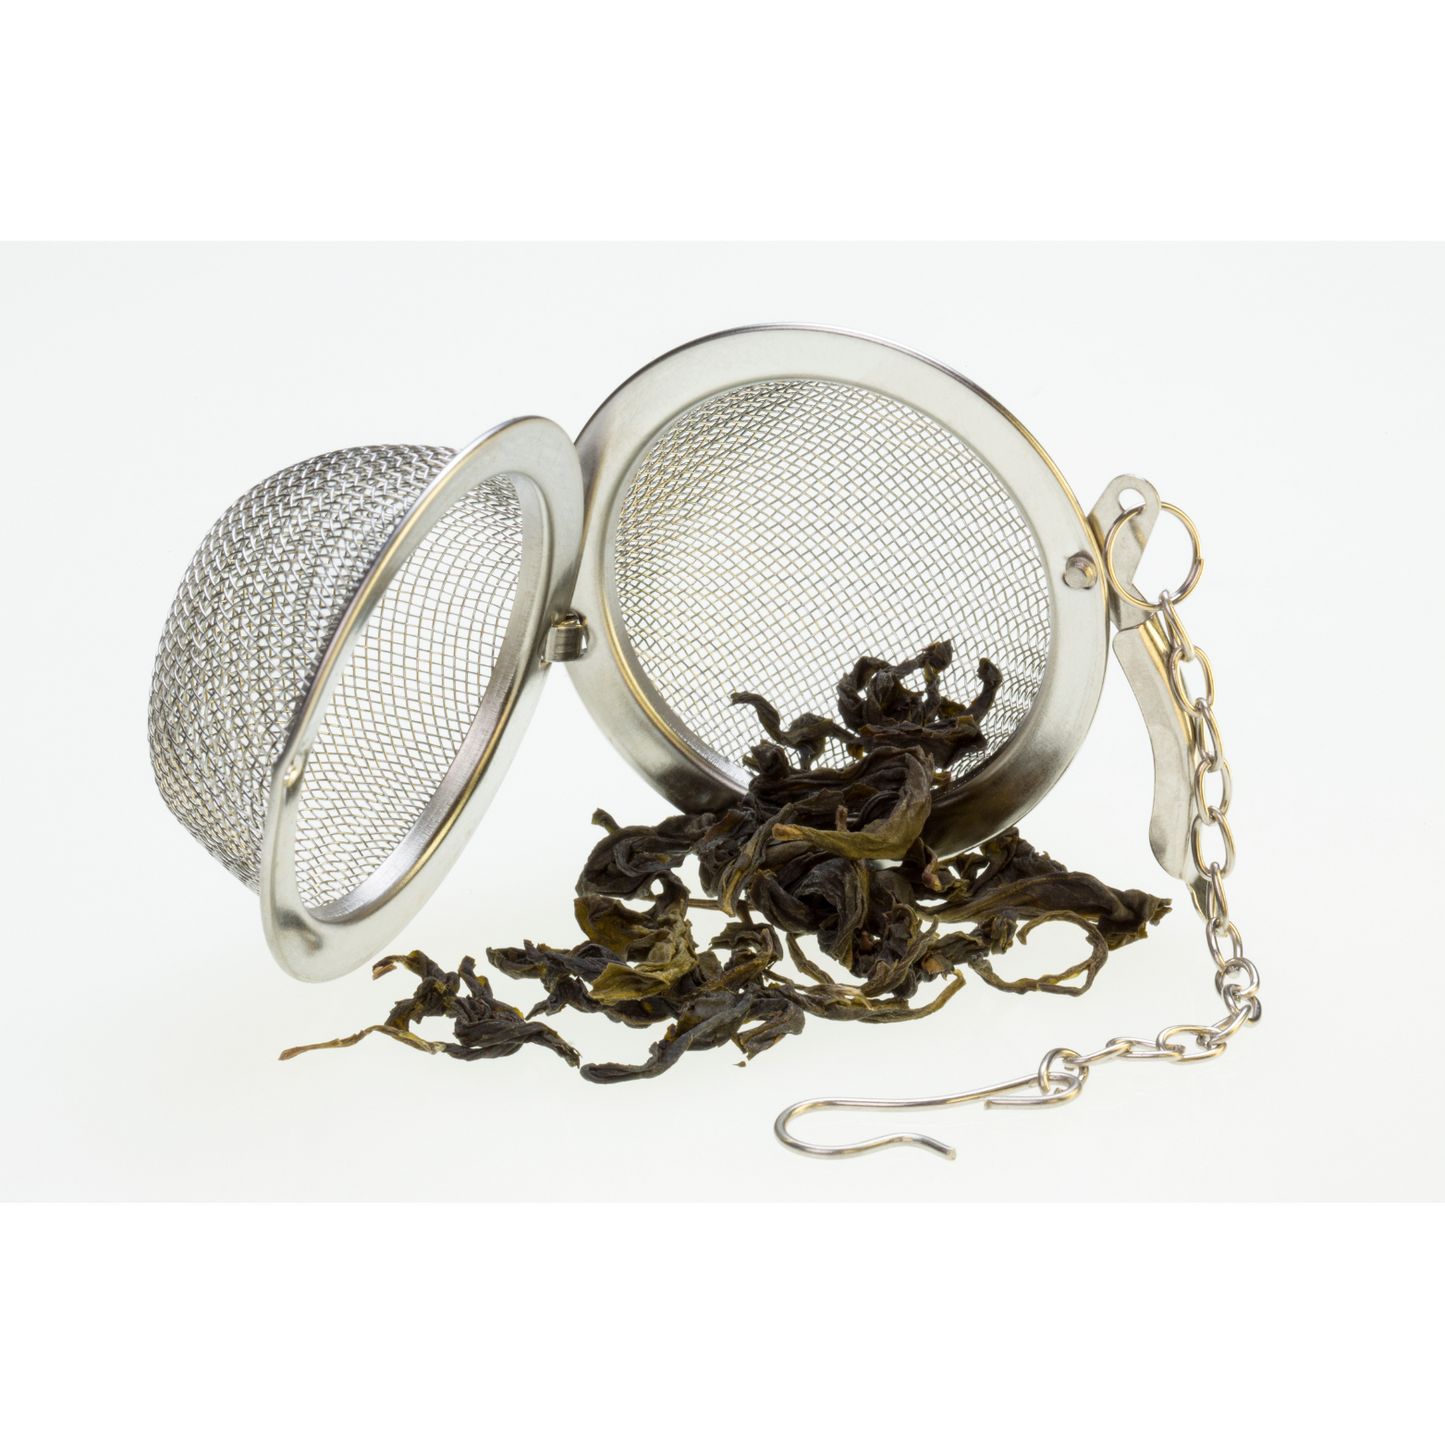 Witchy Pooh's Tea Infuser Mesh Ball 1.5inch for Brewing Single Cup Loose Leaf Tea